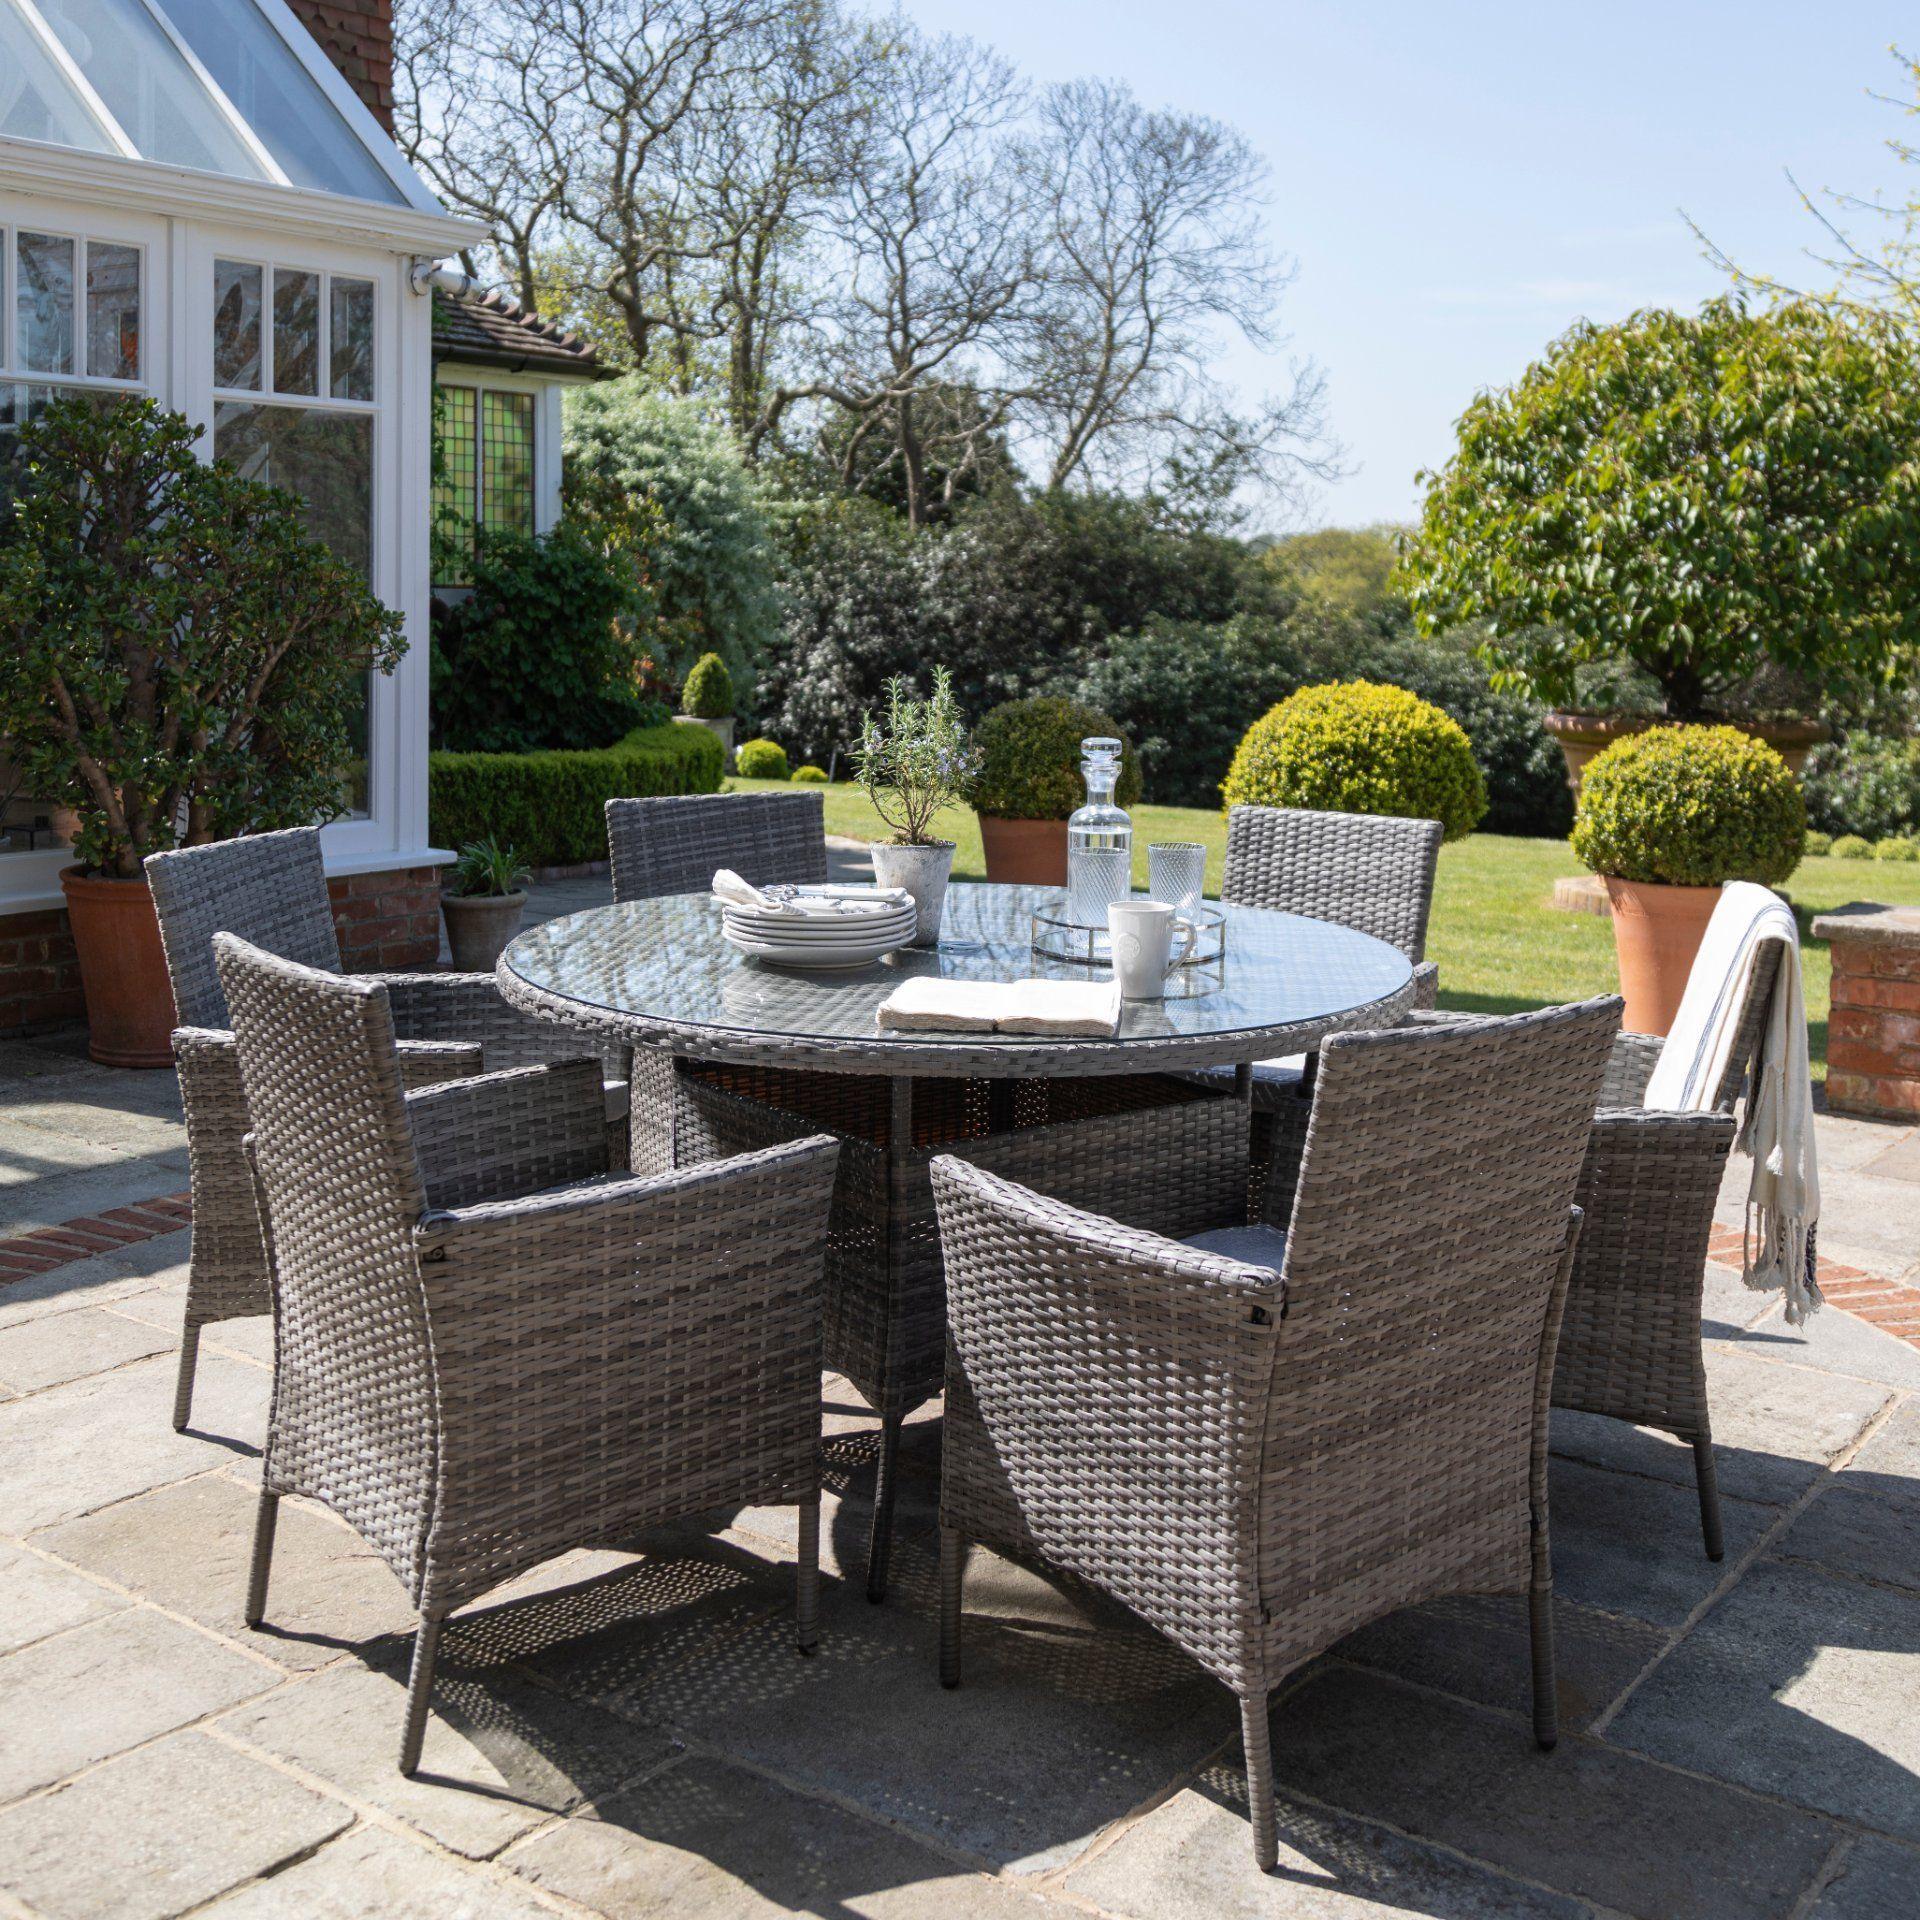 6 Seater Rattan Dining Table Set in Grey - Garden Furniture Outdoor  - Laura James